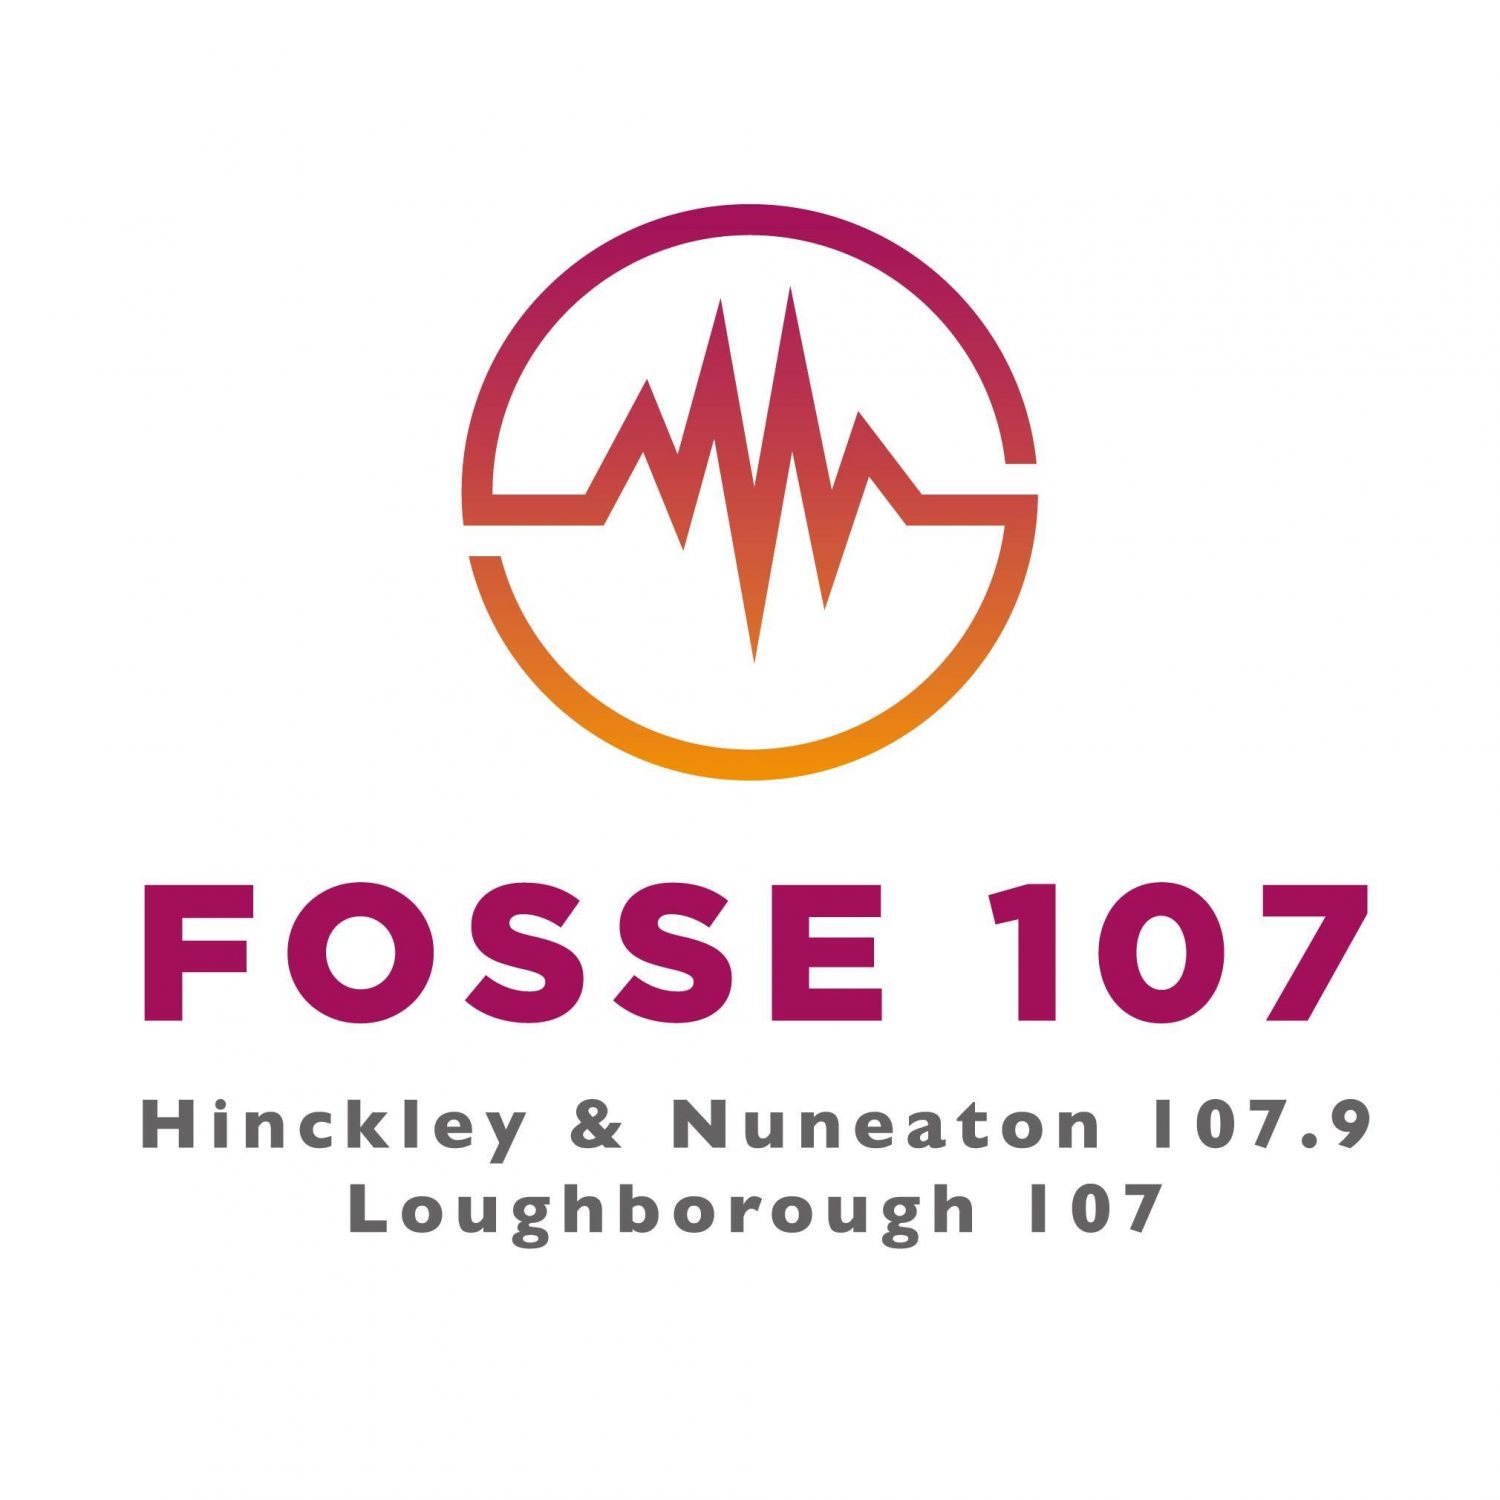 Get your business on the FOSSE 107 Advent Calendar!